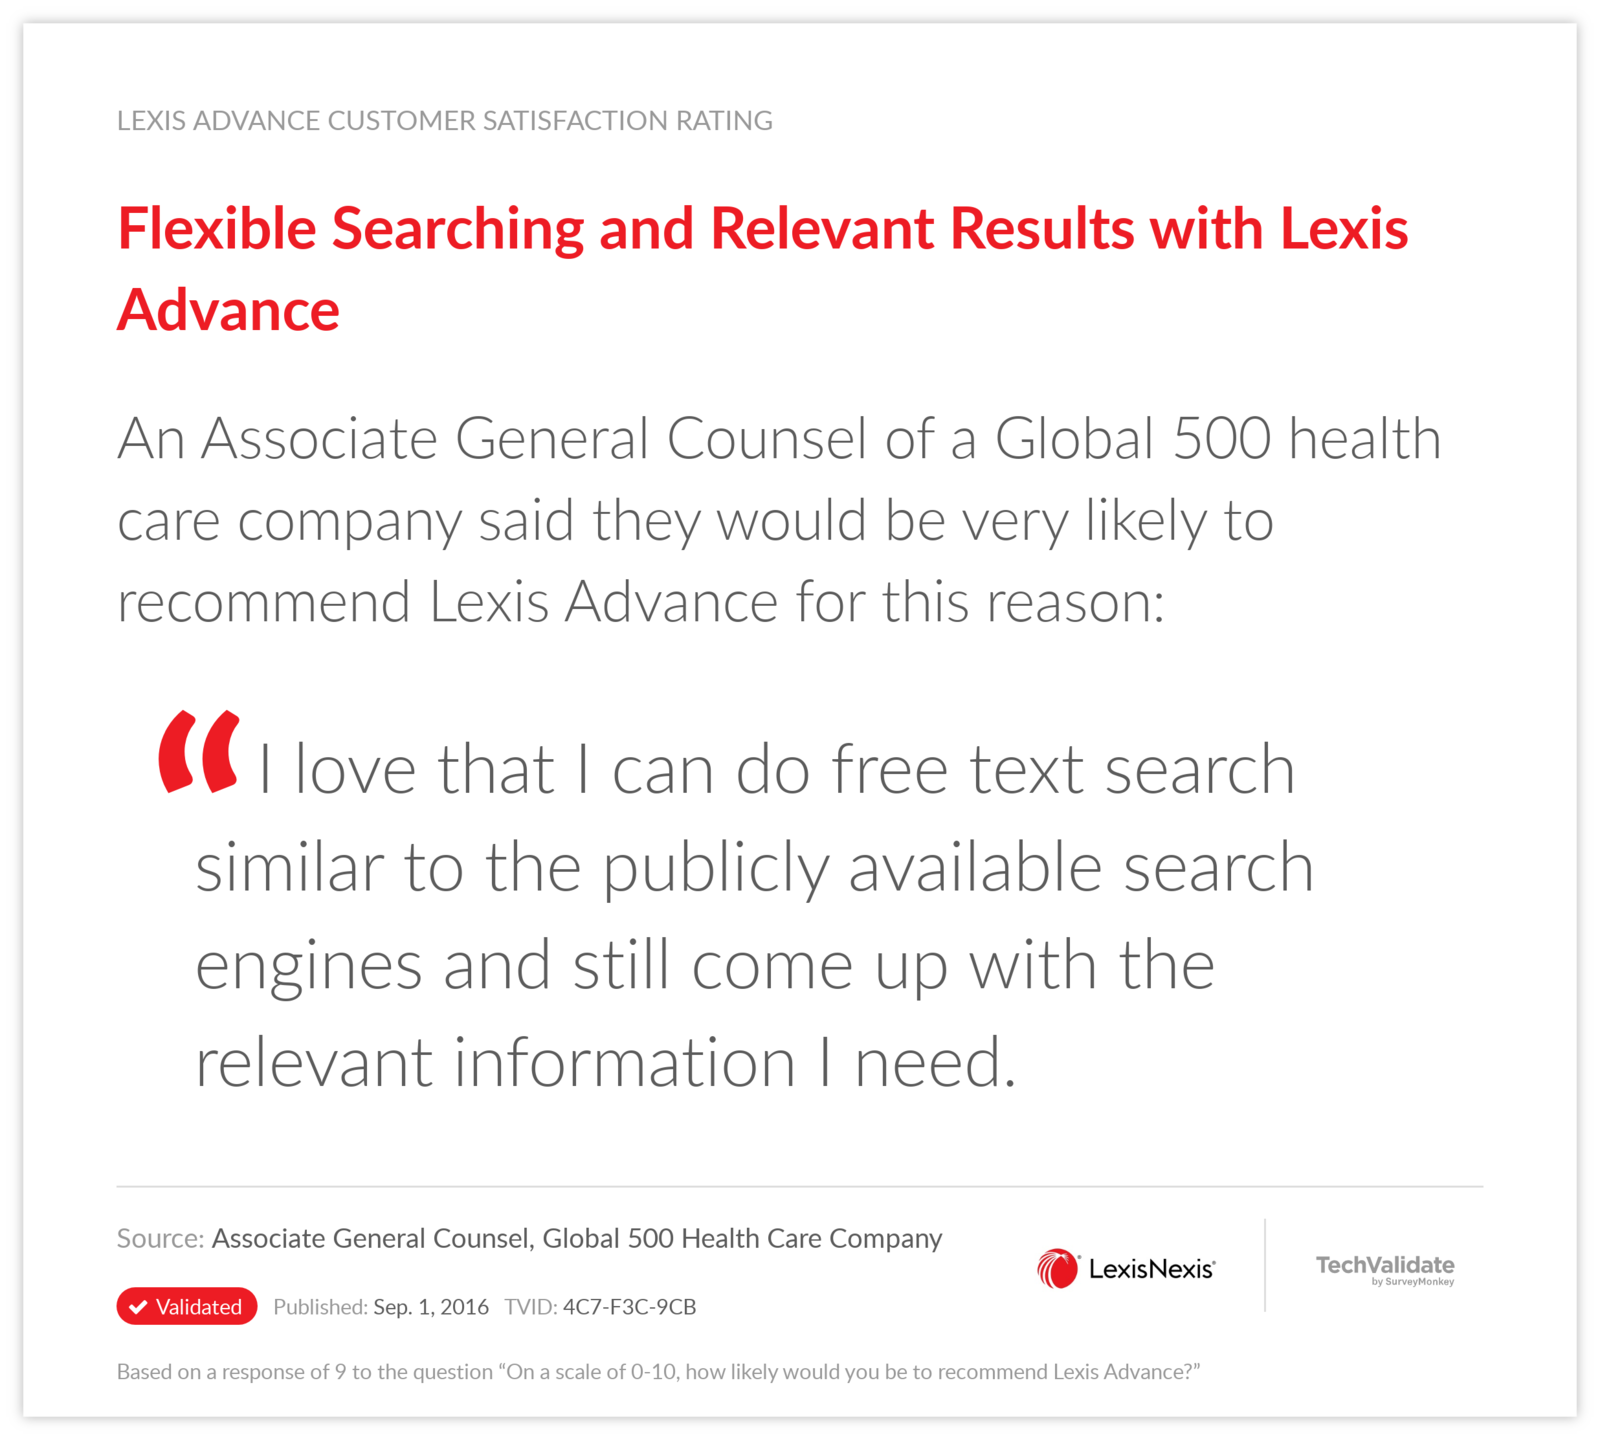 Flexible Searching and Relevant Results with Lexis Advance